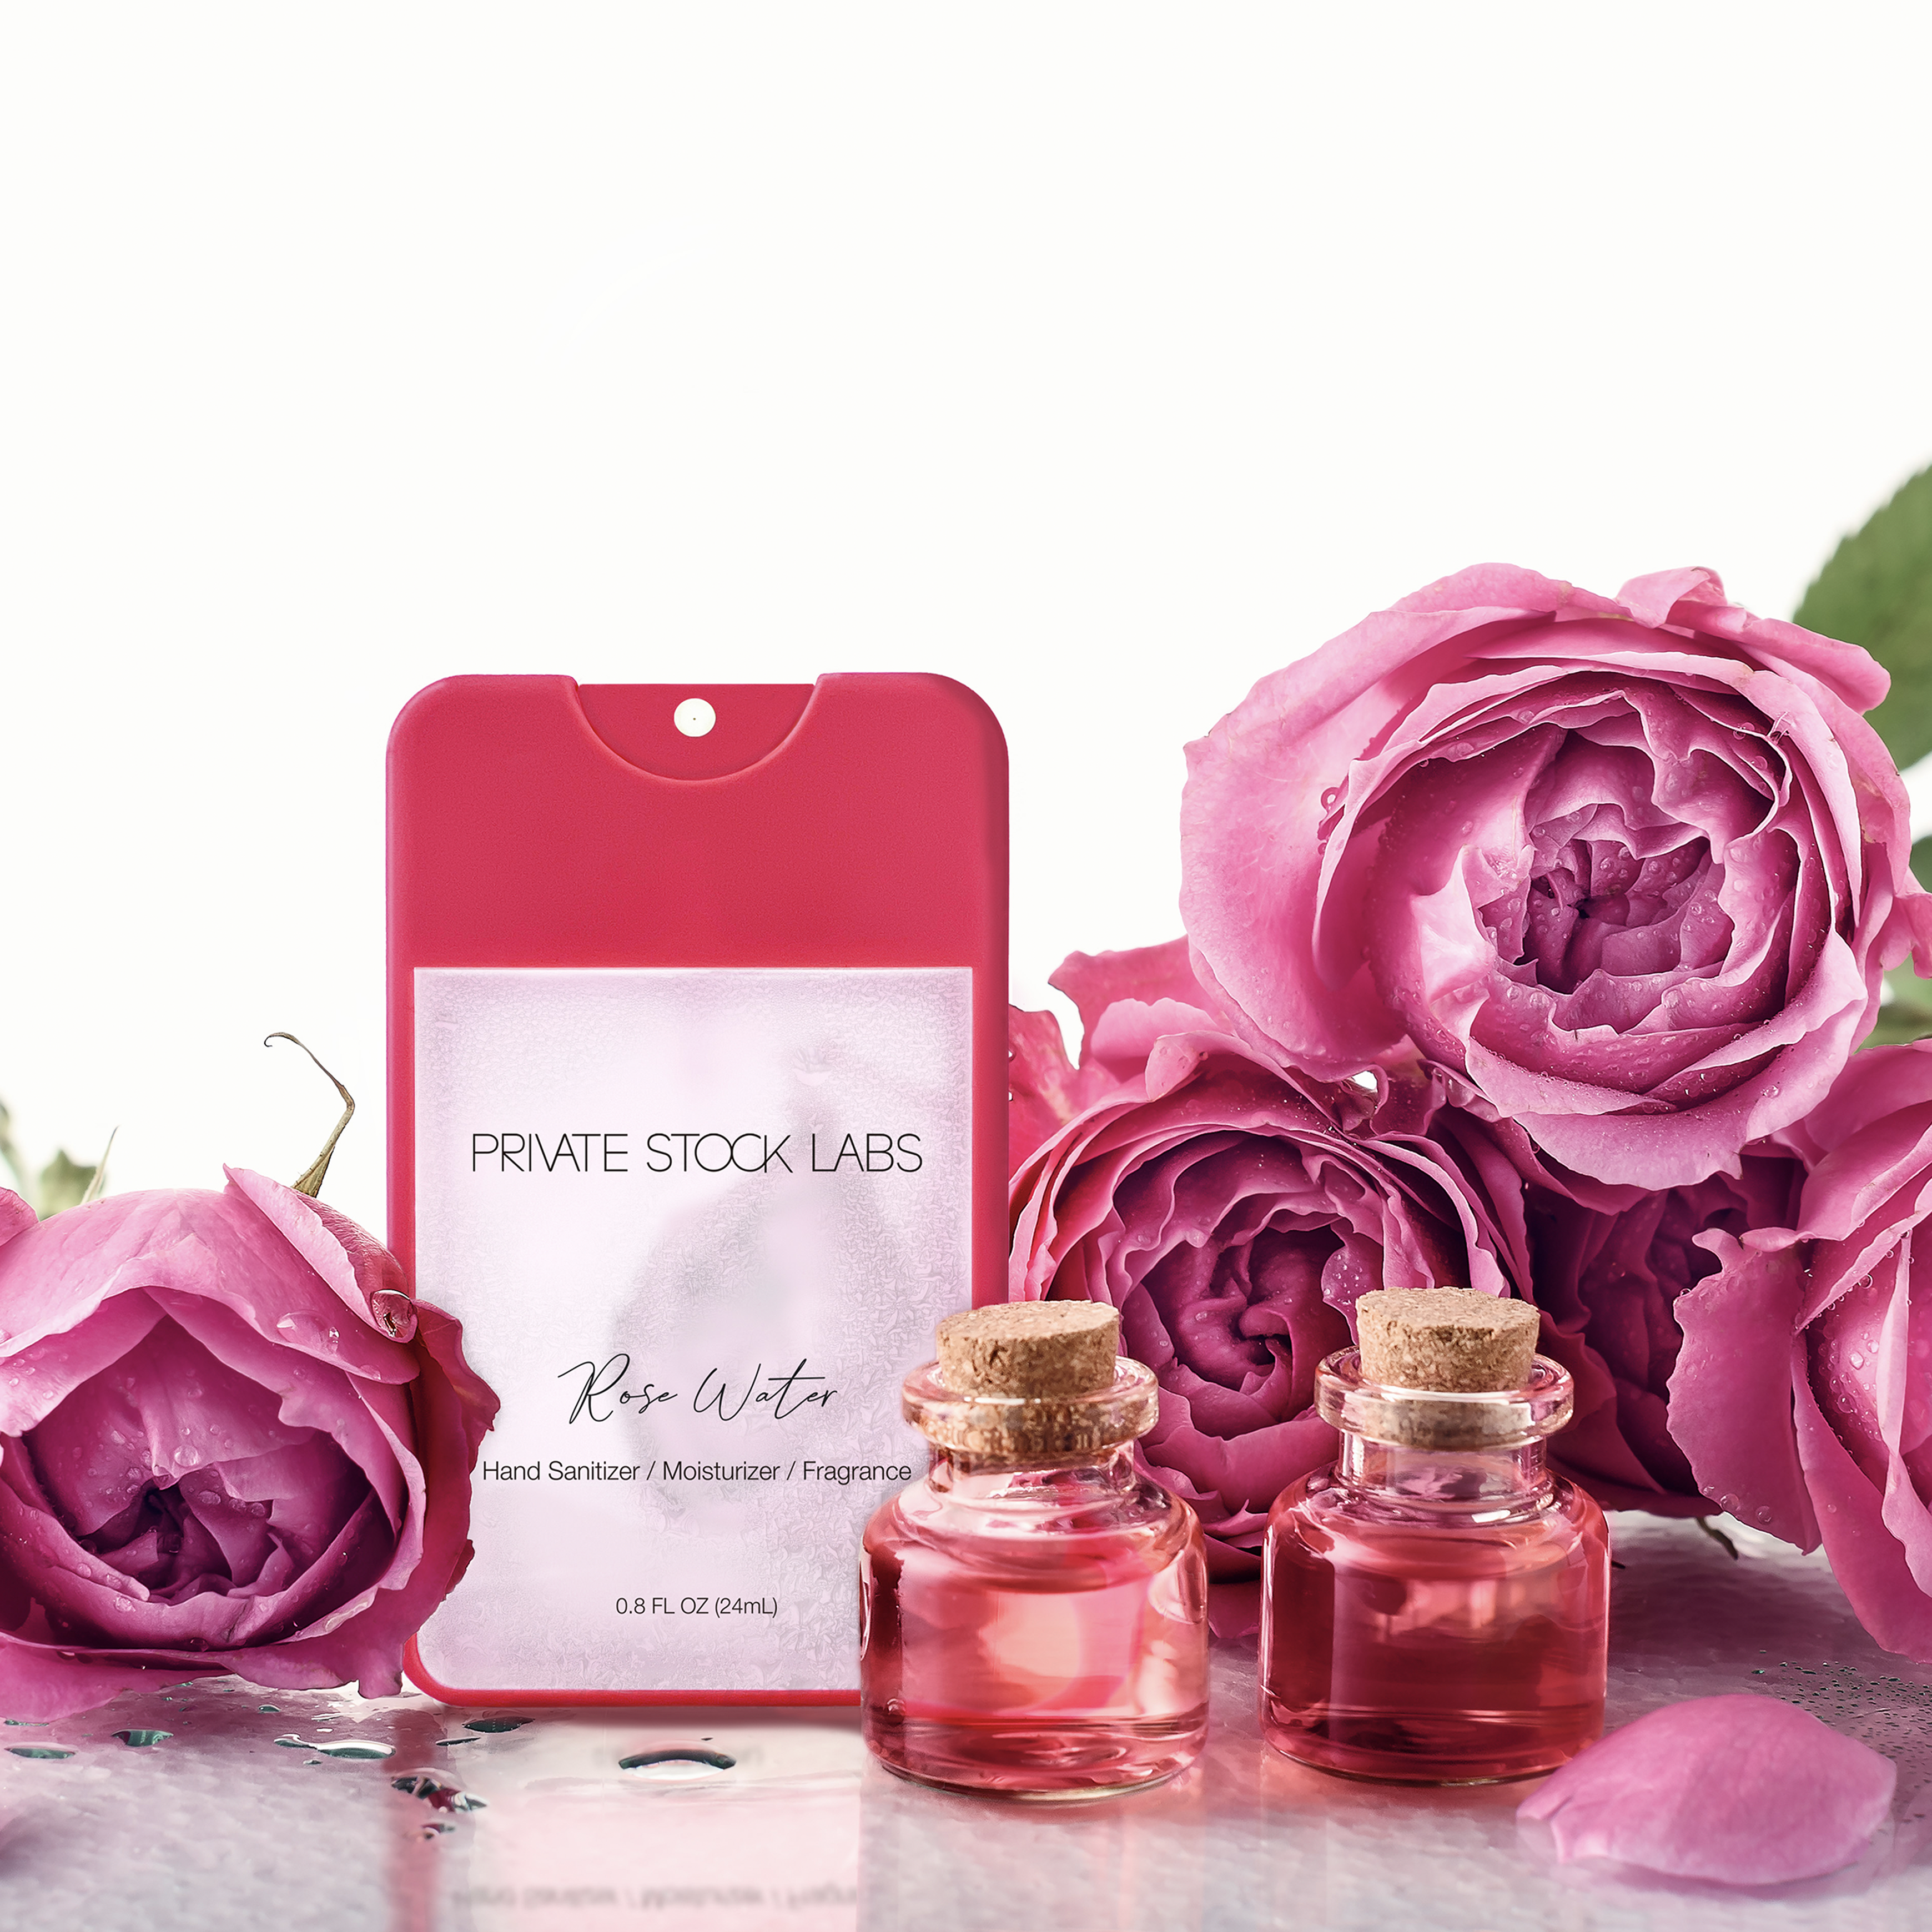 Rose Water Bundle: 3-in-1 Sanitizer / Moisturizer / Fragrance and Essential Oil Parfum Candle